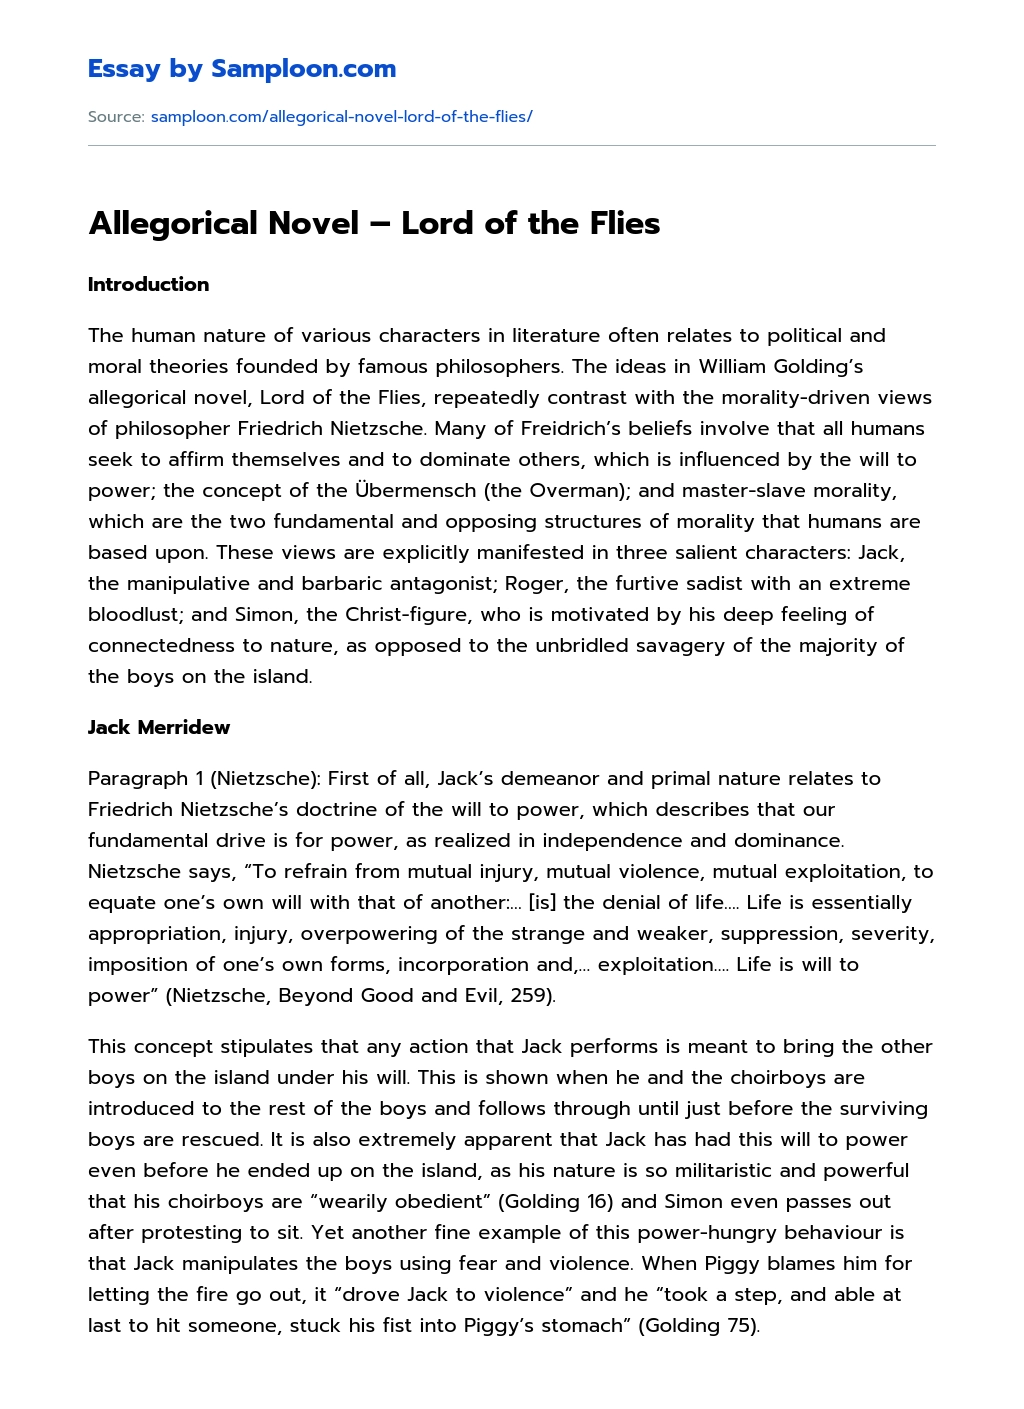 Allegorical Novel – Lord of the Flies essay